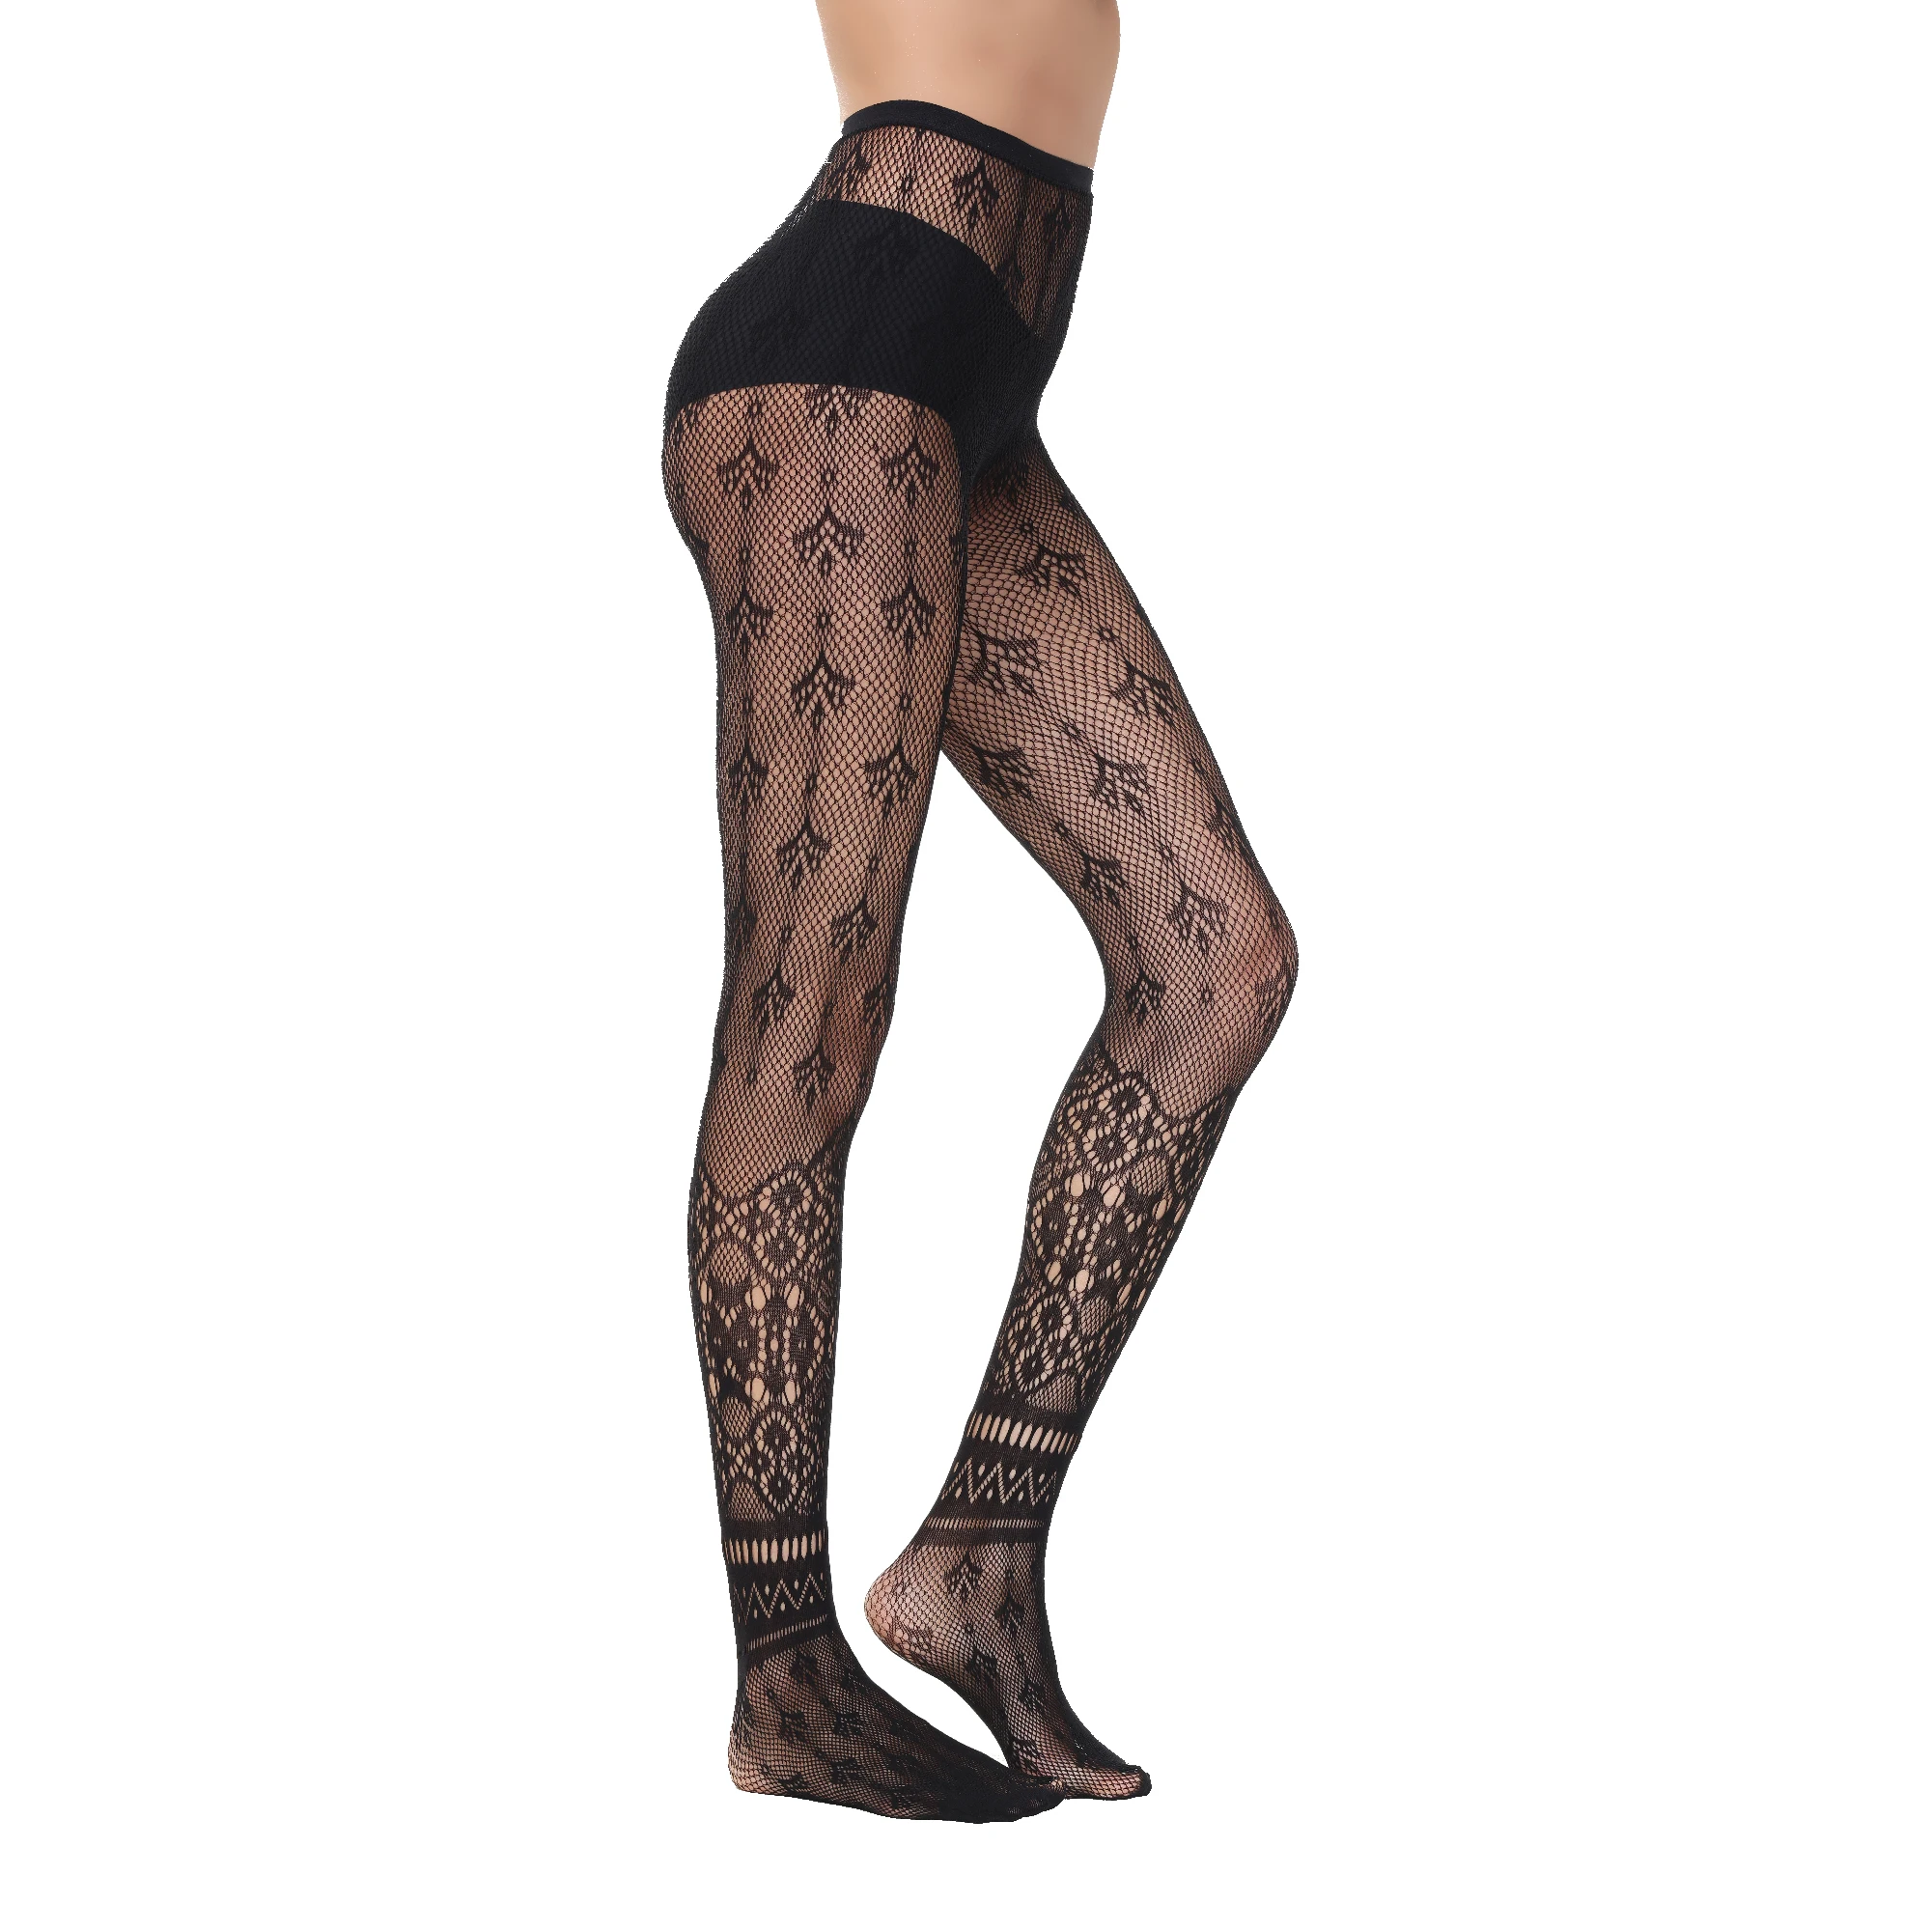 tights for women wholesales seamless High quality sexy pantyhose fishnet tights